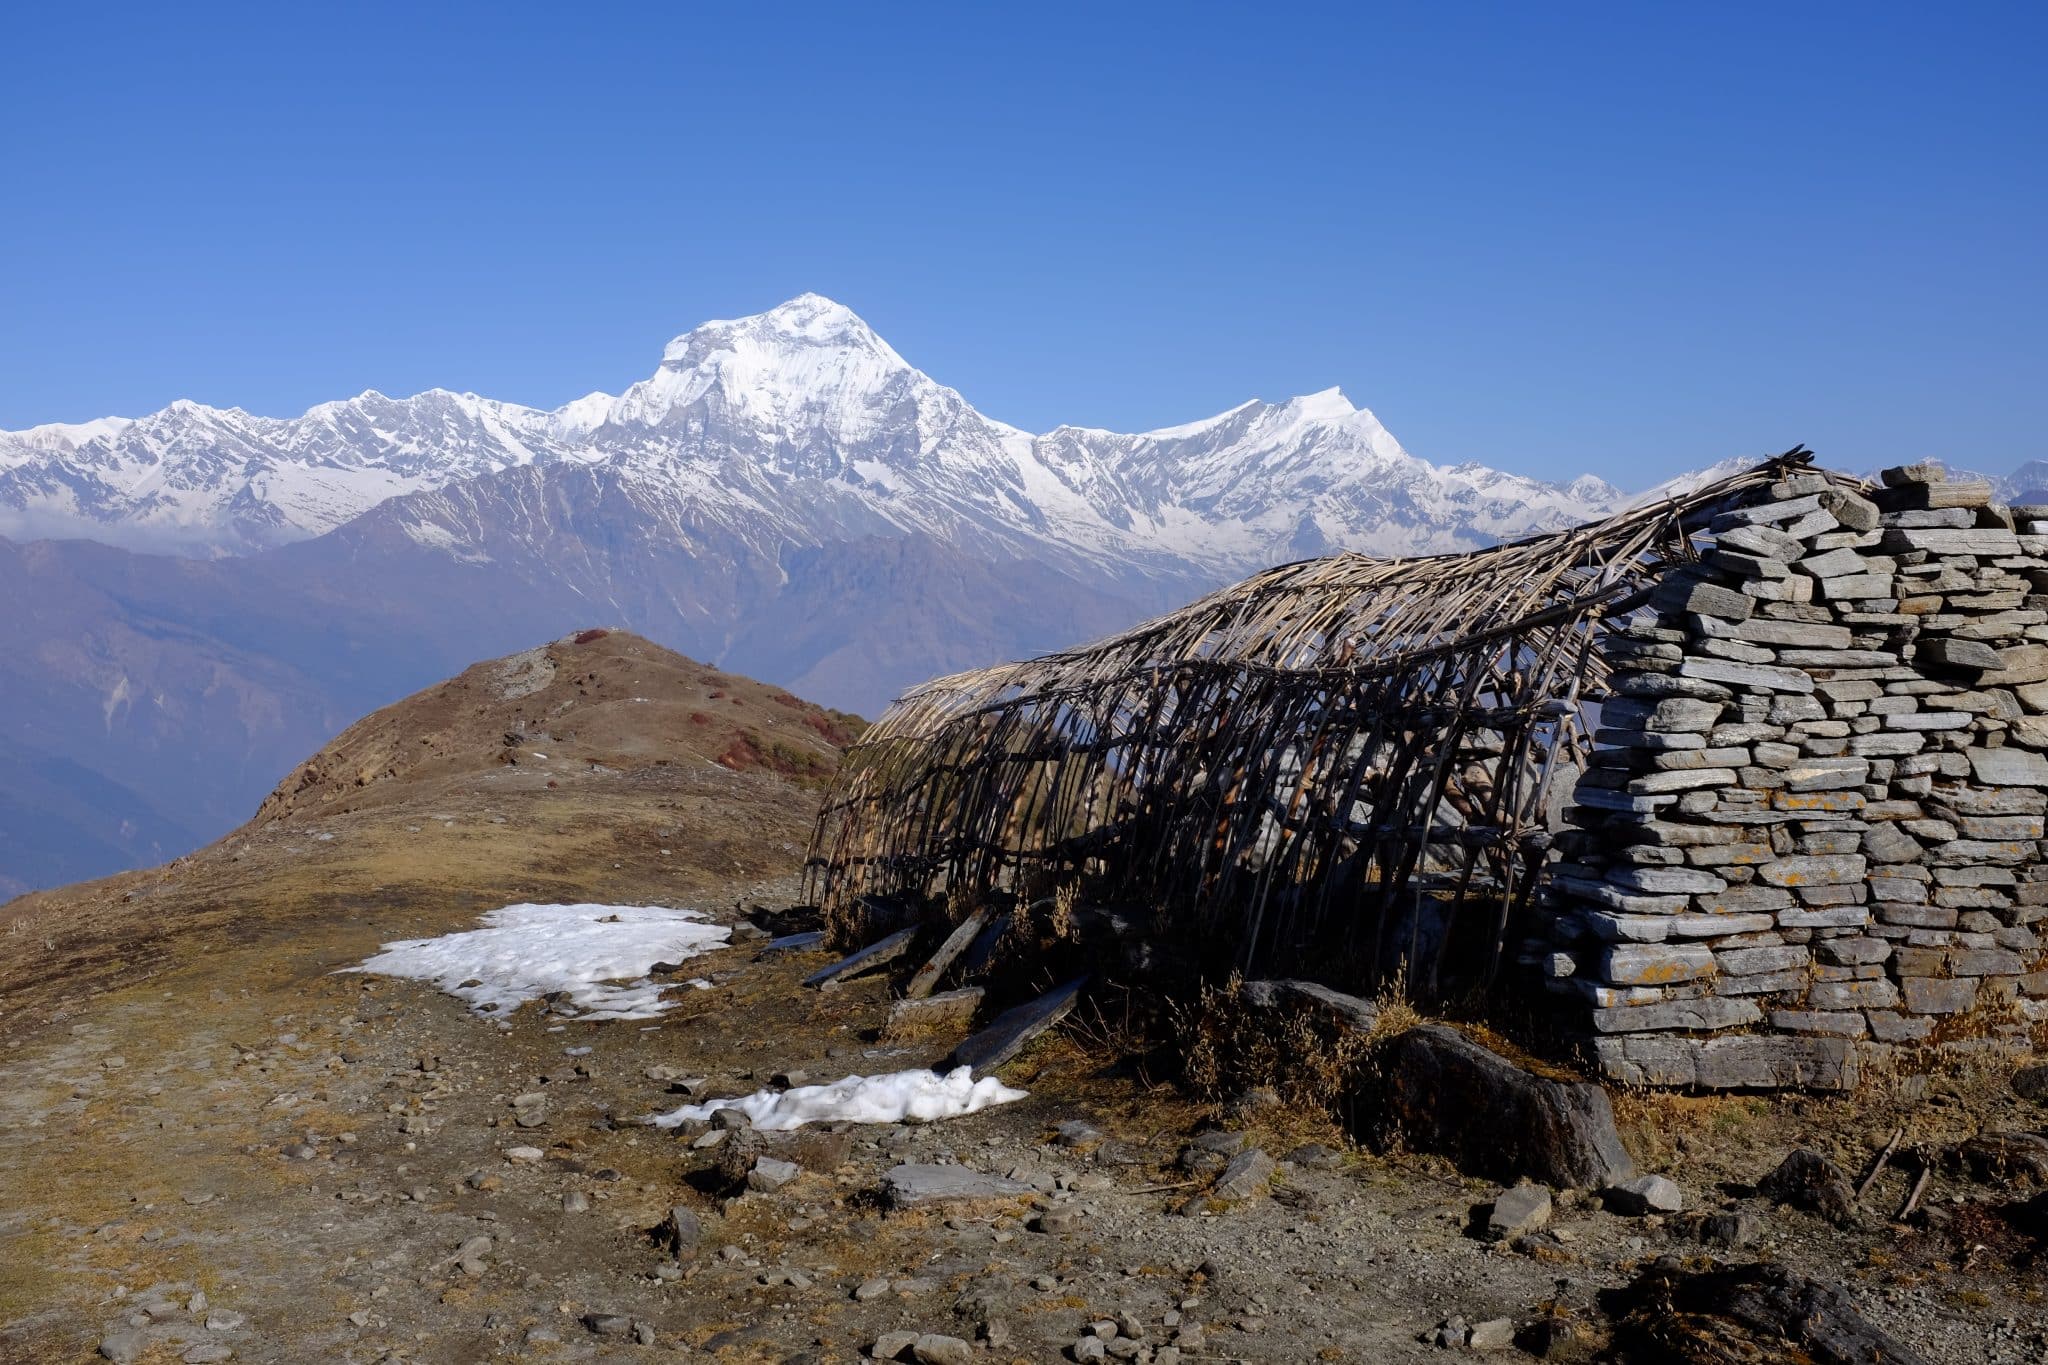 A threadbare shelter stands atop the barren and exposed Khopra Ridge in the shadow of great Mount Dhaulagiri, the seventh highest mountain on Earth. 